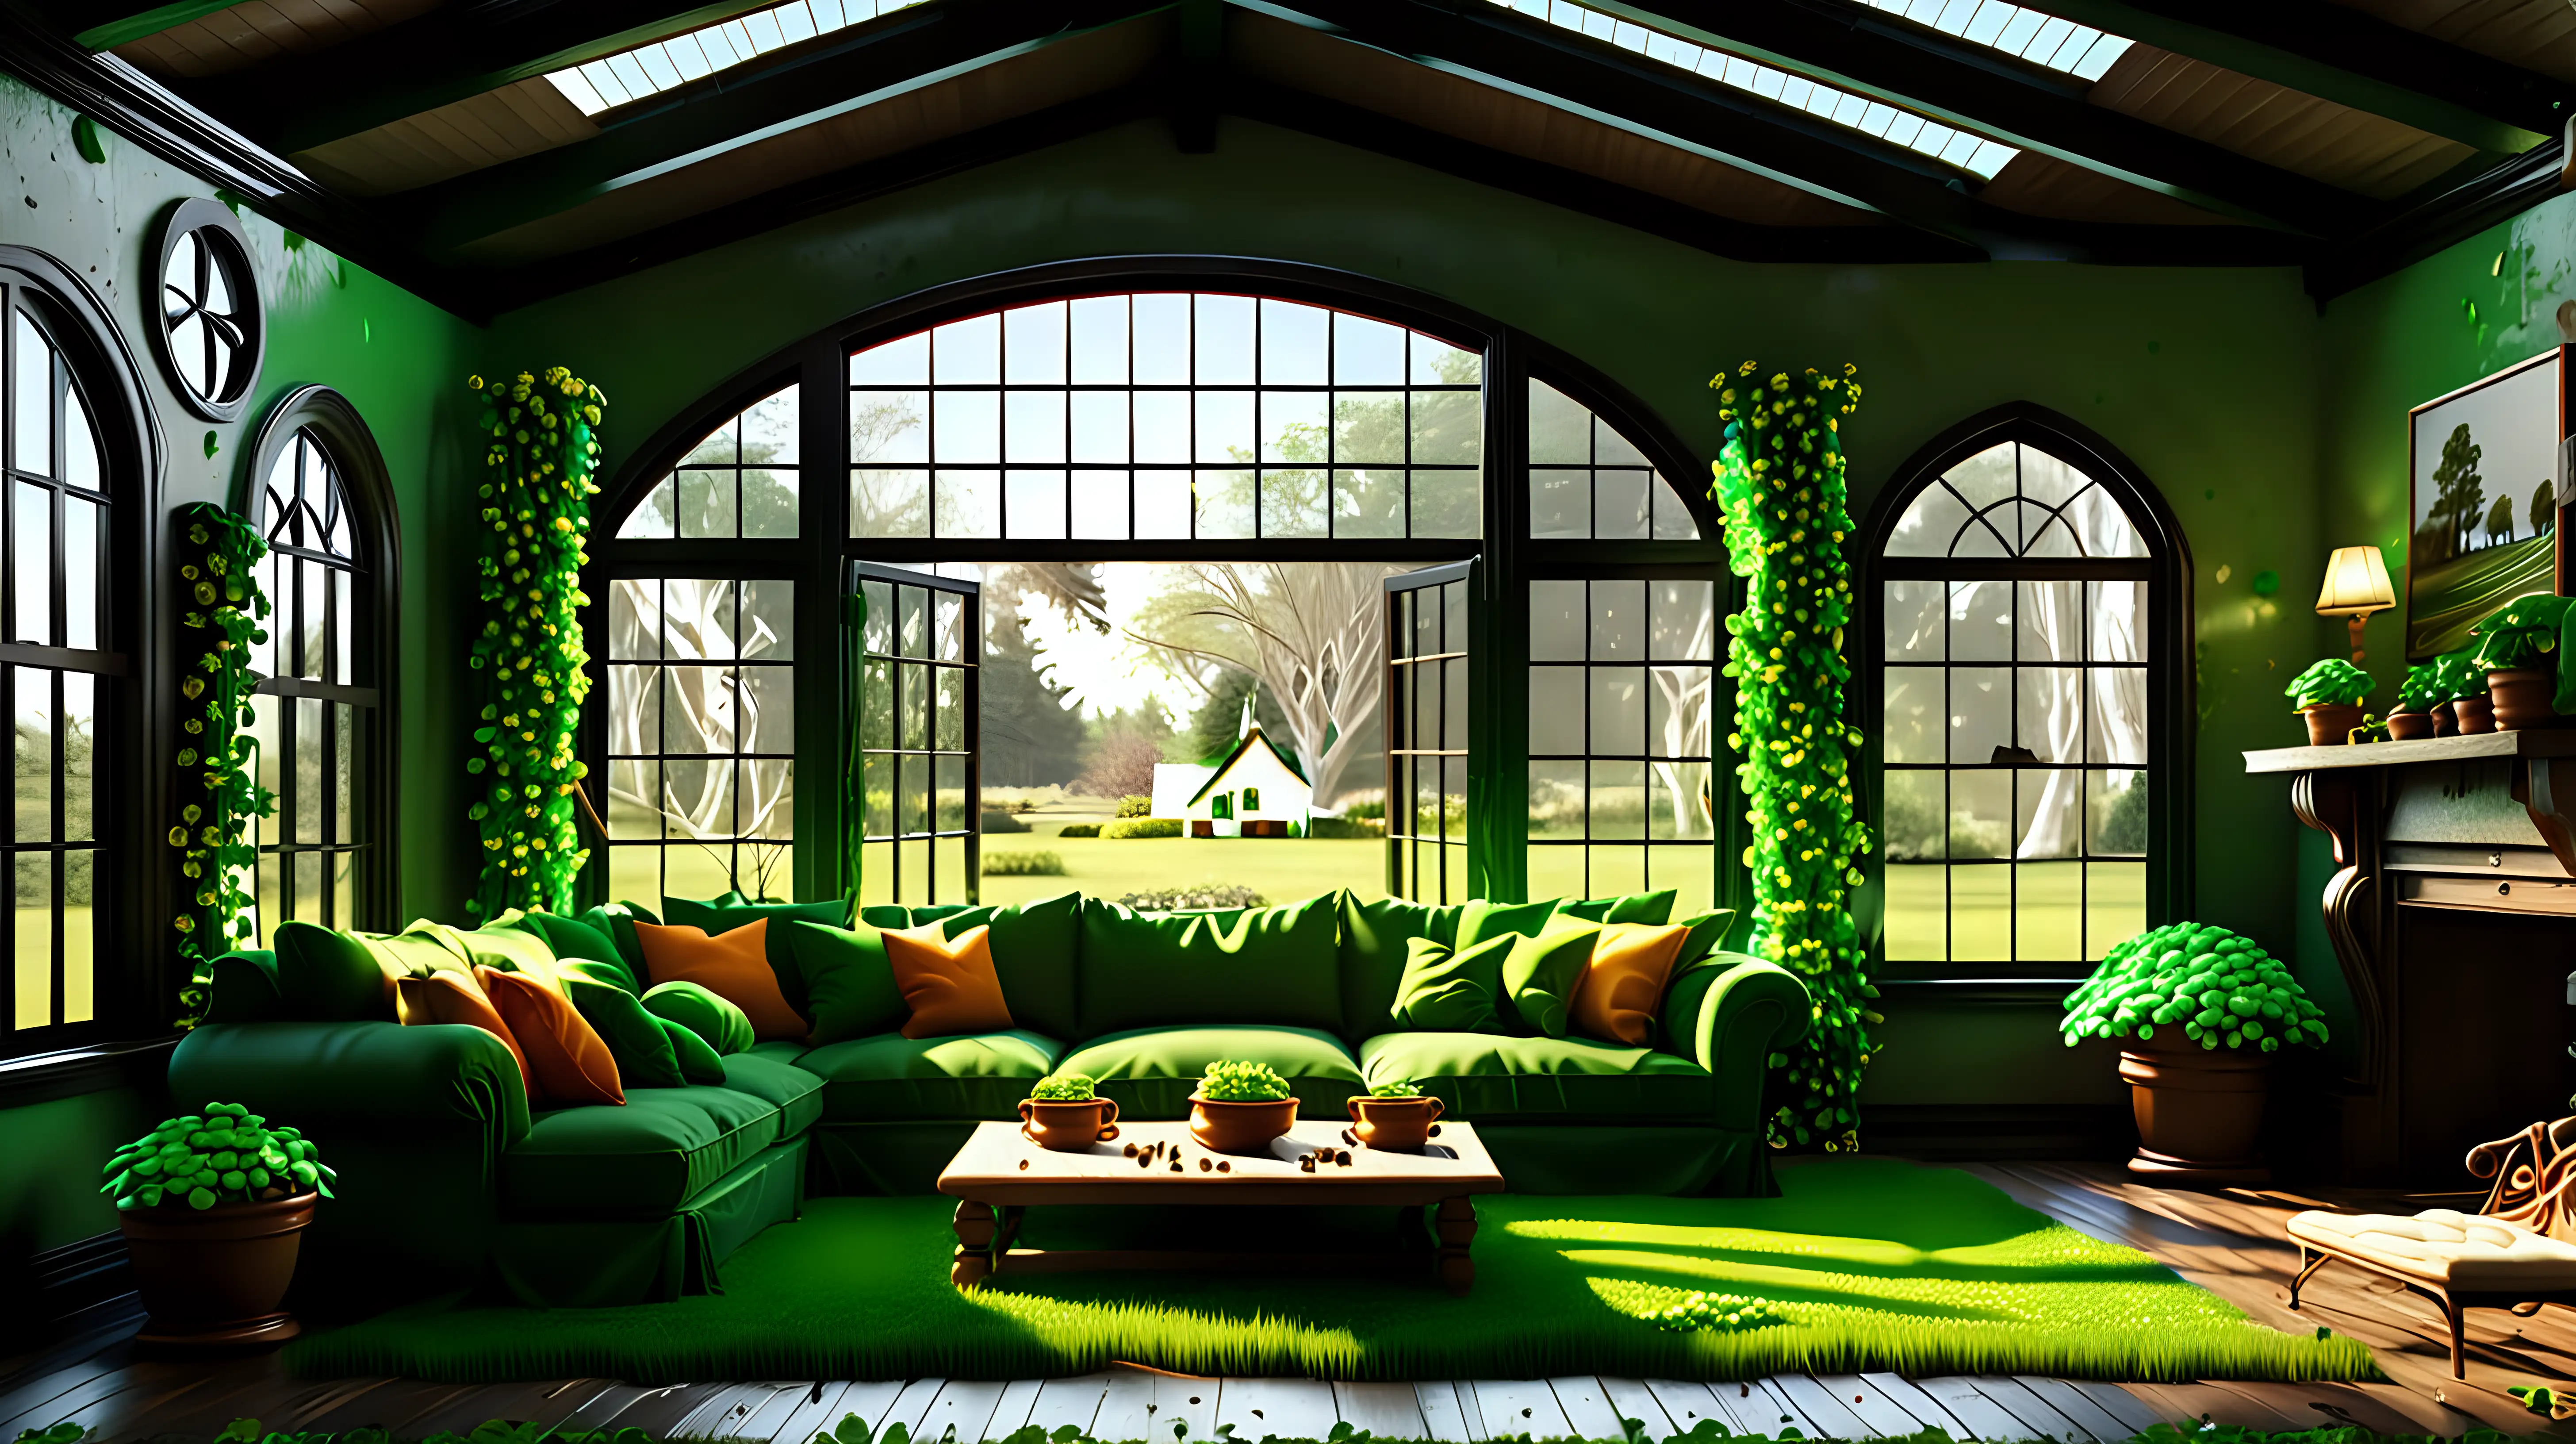 Hyperrealistic Leprechaun House with Large Windows and Clovers